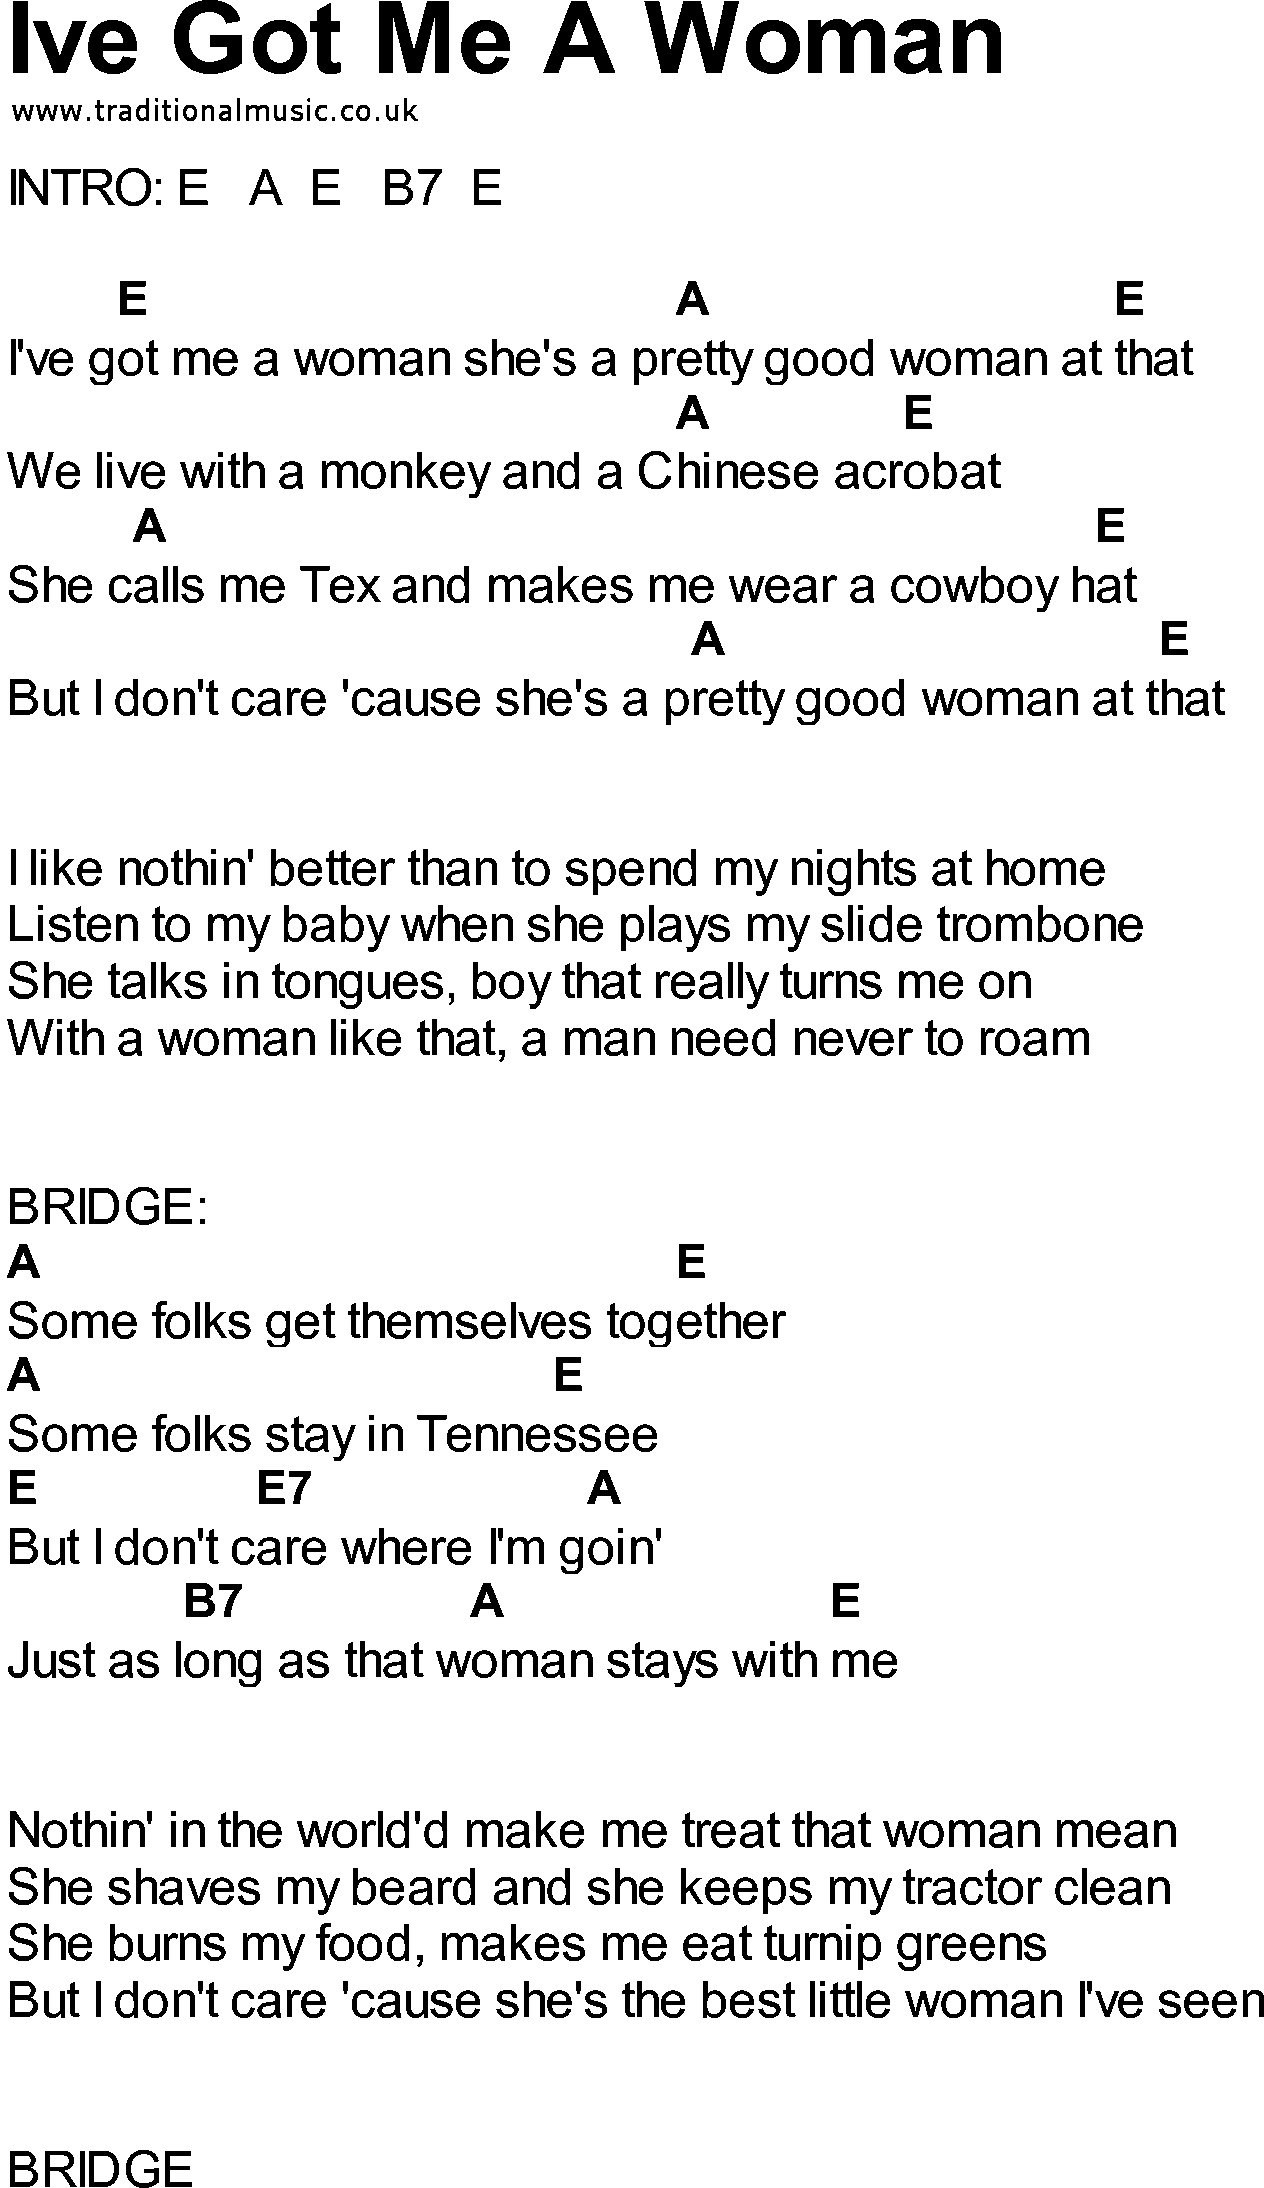 Bluegrass songs with chords - Ive Got Me A Woman